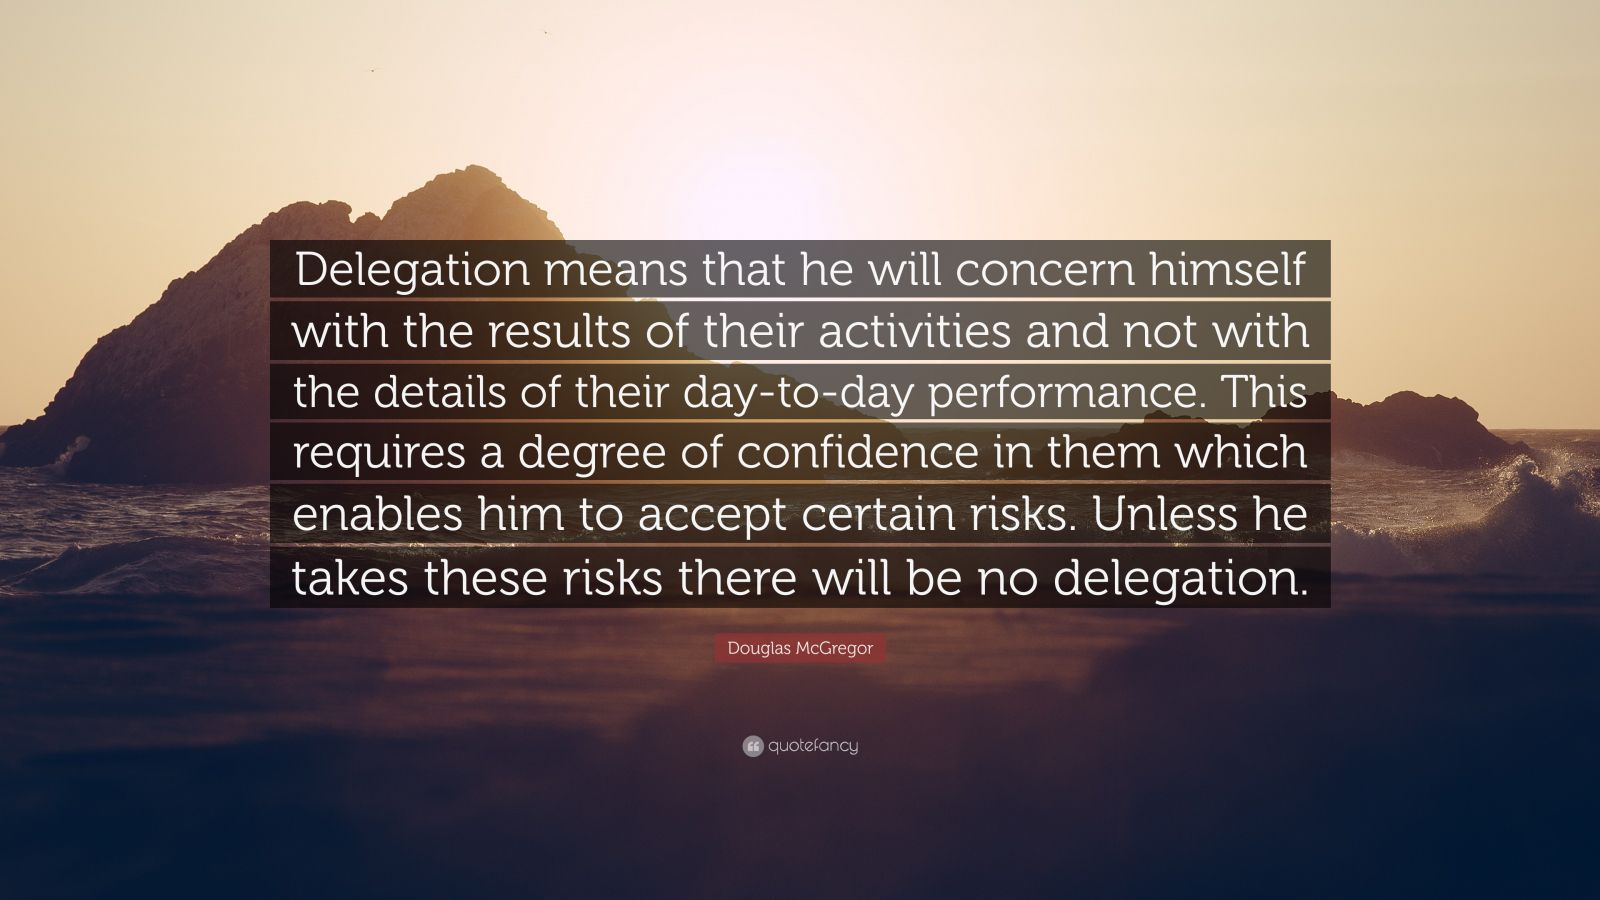 Douglas McGregor Quote: “Delegation means that he will concern himself ...